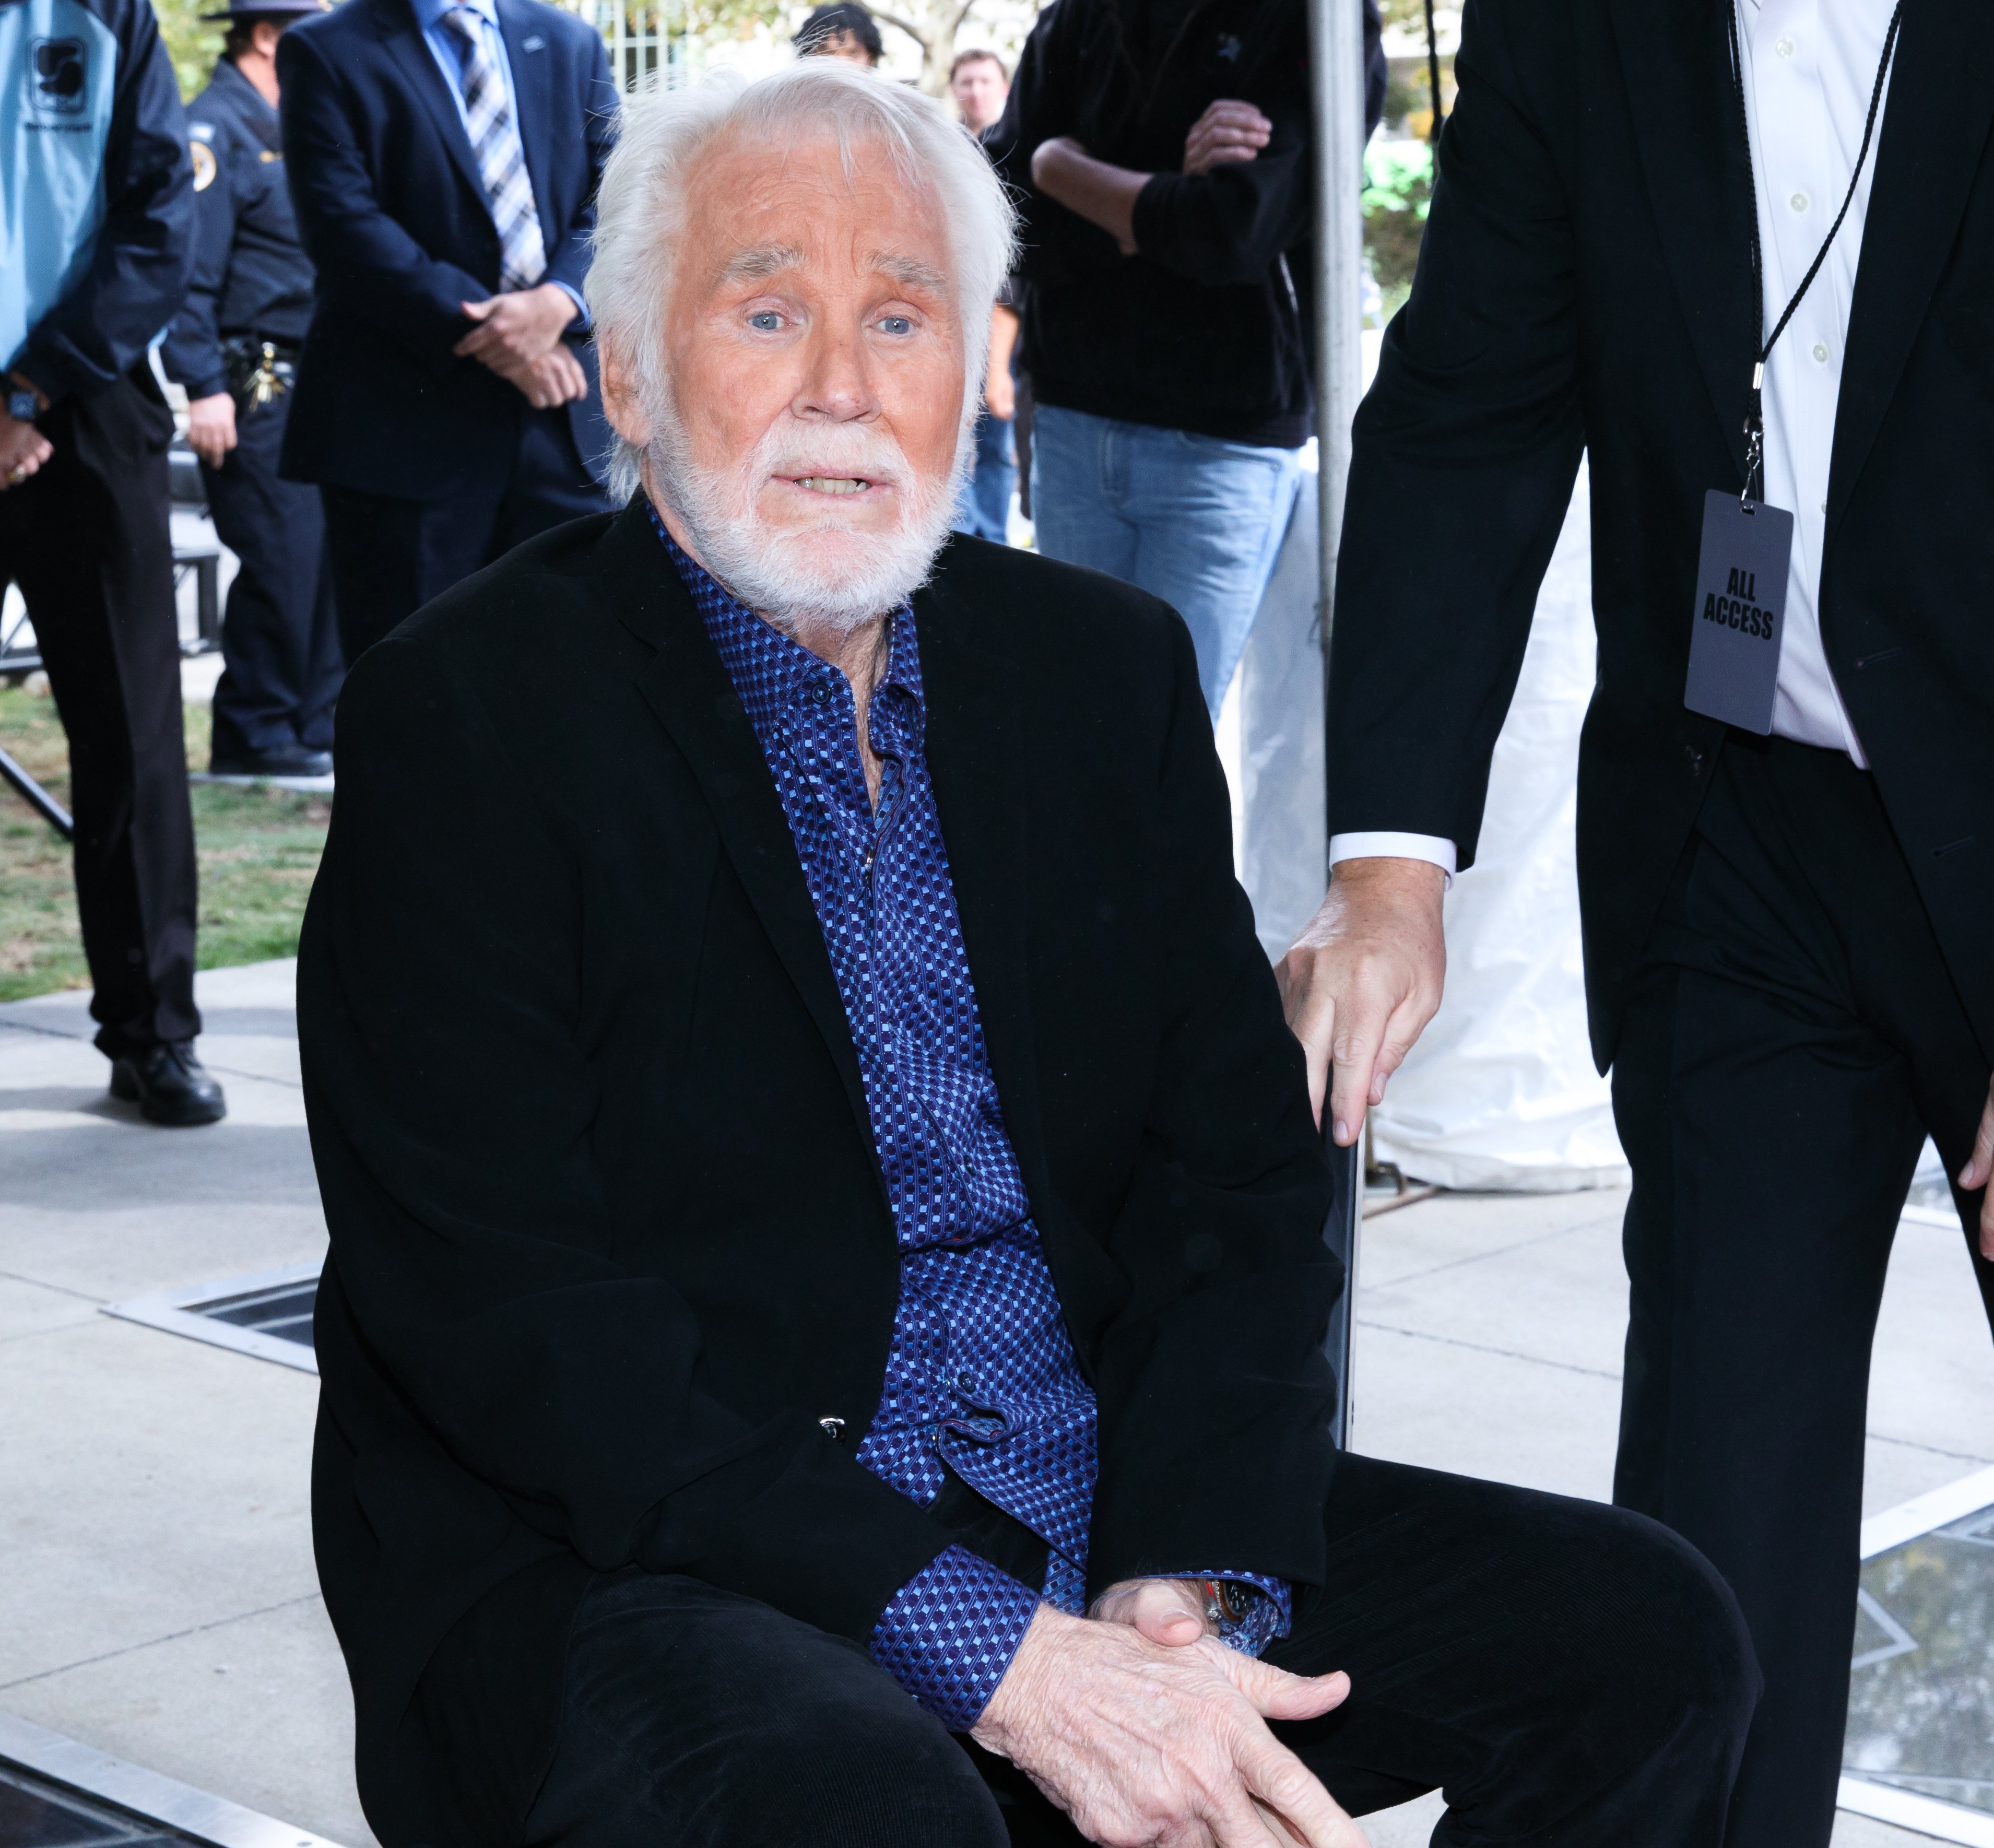 Kenny Rogers is inducted into the Nashville Music City Walk of Fame on October 24, 2017, in Nashville, Tennessee. | Source: Getty Images.